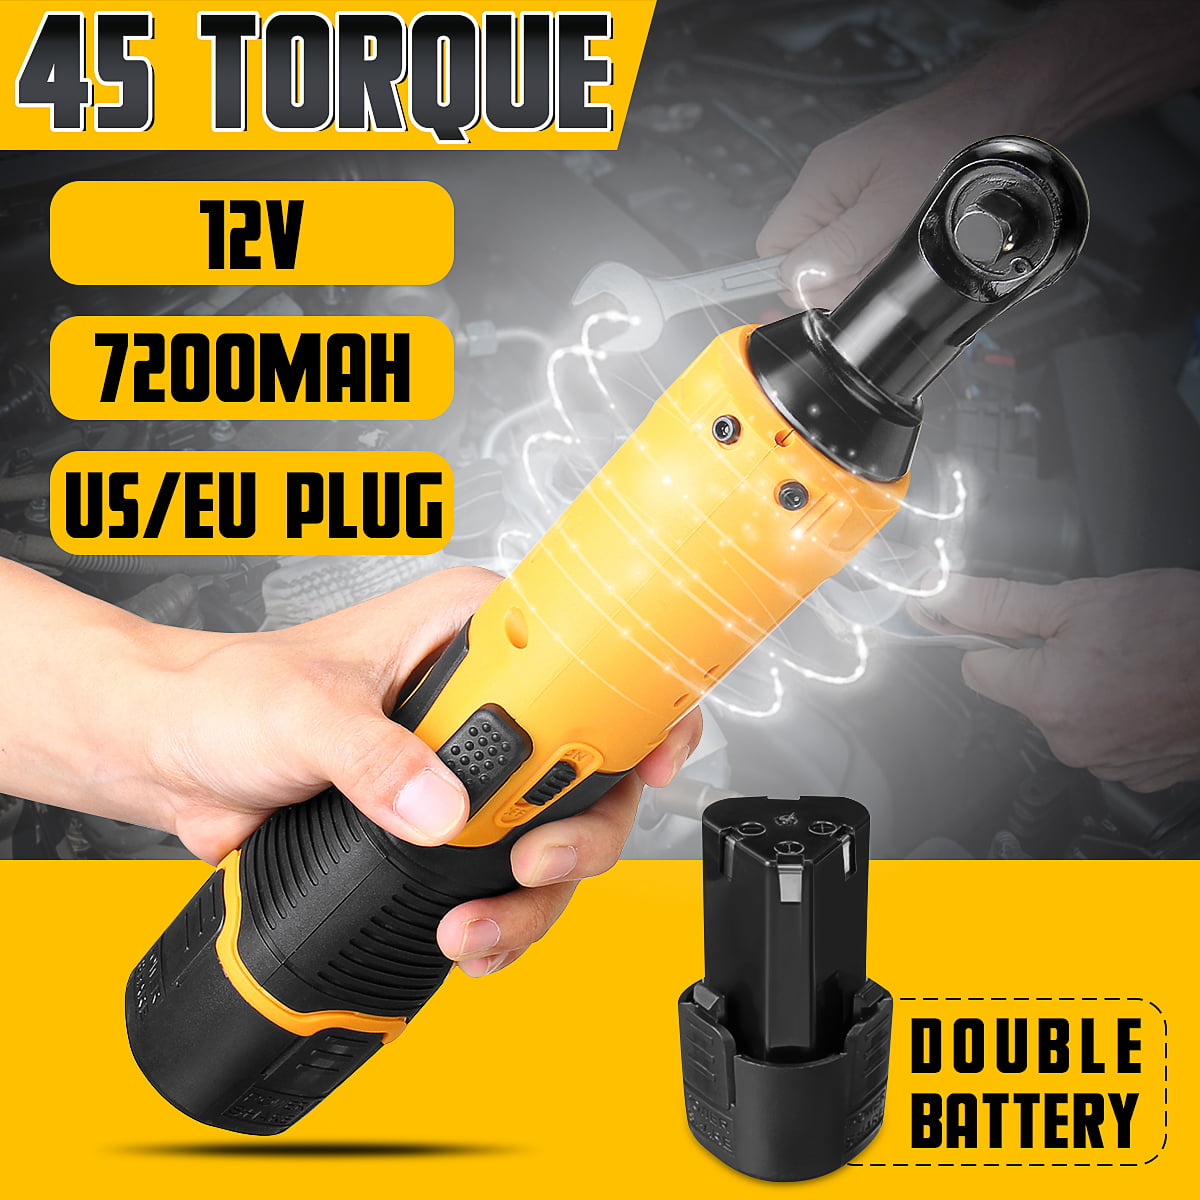 3 Flexible Position and 6 Torque Setting Front LED and Rear Flashlight Electric Screwdriver SDH13DC Cordless Rechargeable Screwdriver 3.6V 2.0Ah Lithium Ion Battery MAX Torque 4N.m 